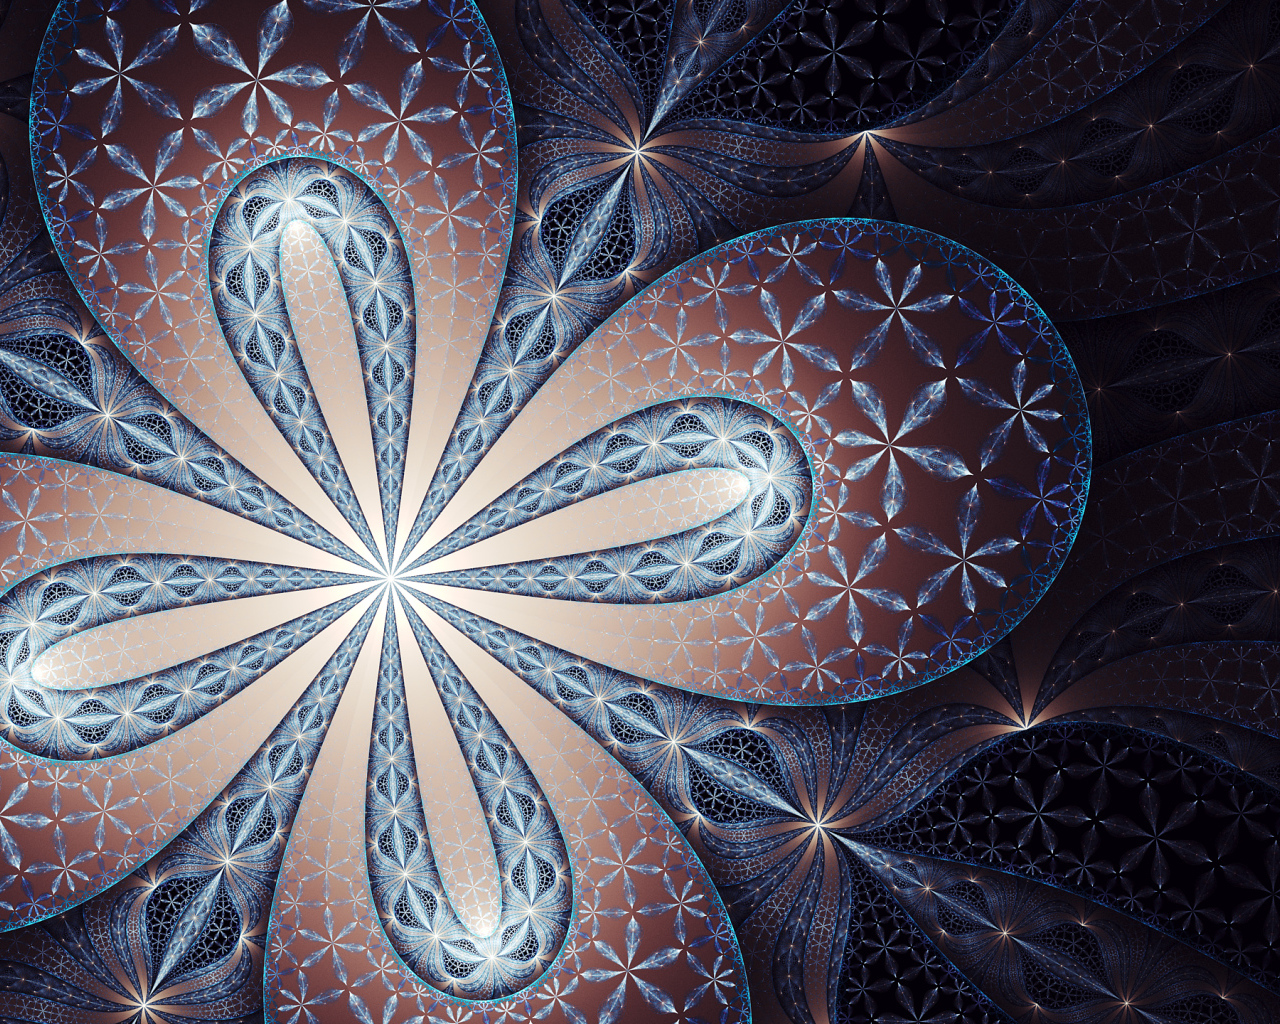 Beautiful fractal flower drawing, 3d graphics